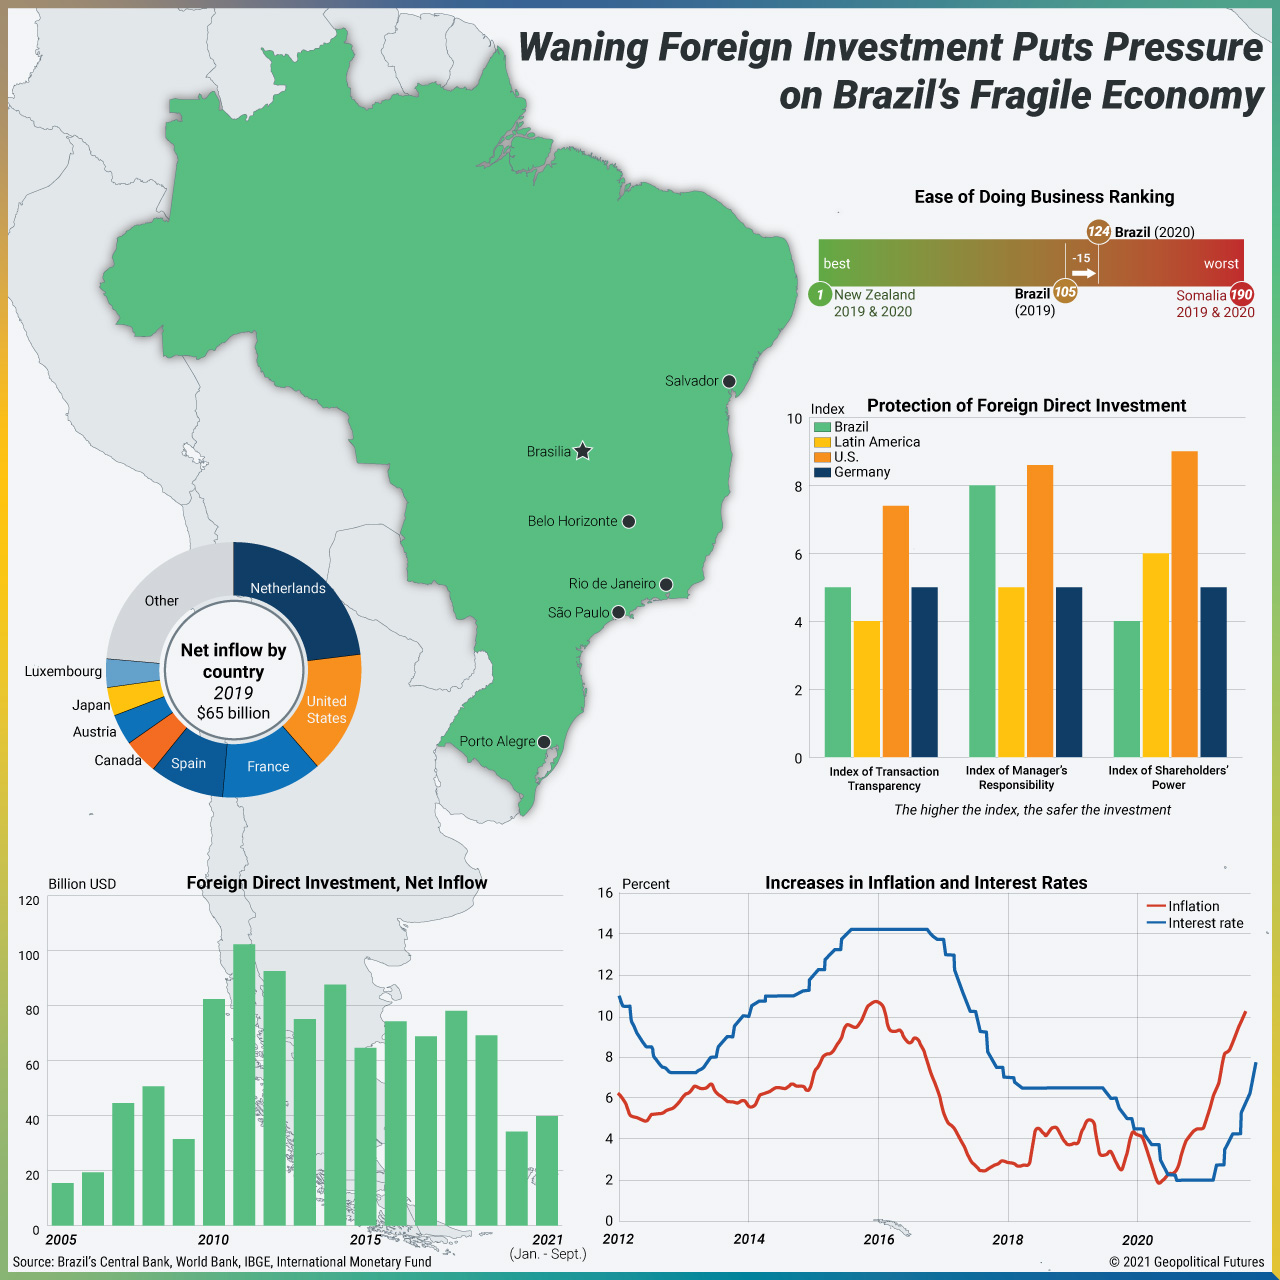 Waning Foreign Investment Puts Pressure on Brazil's Fragile Economy